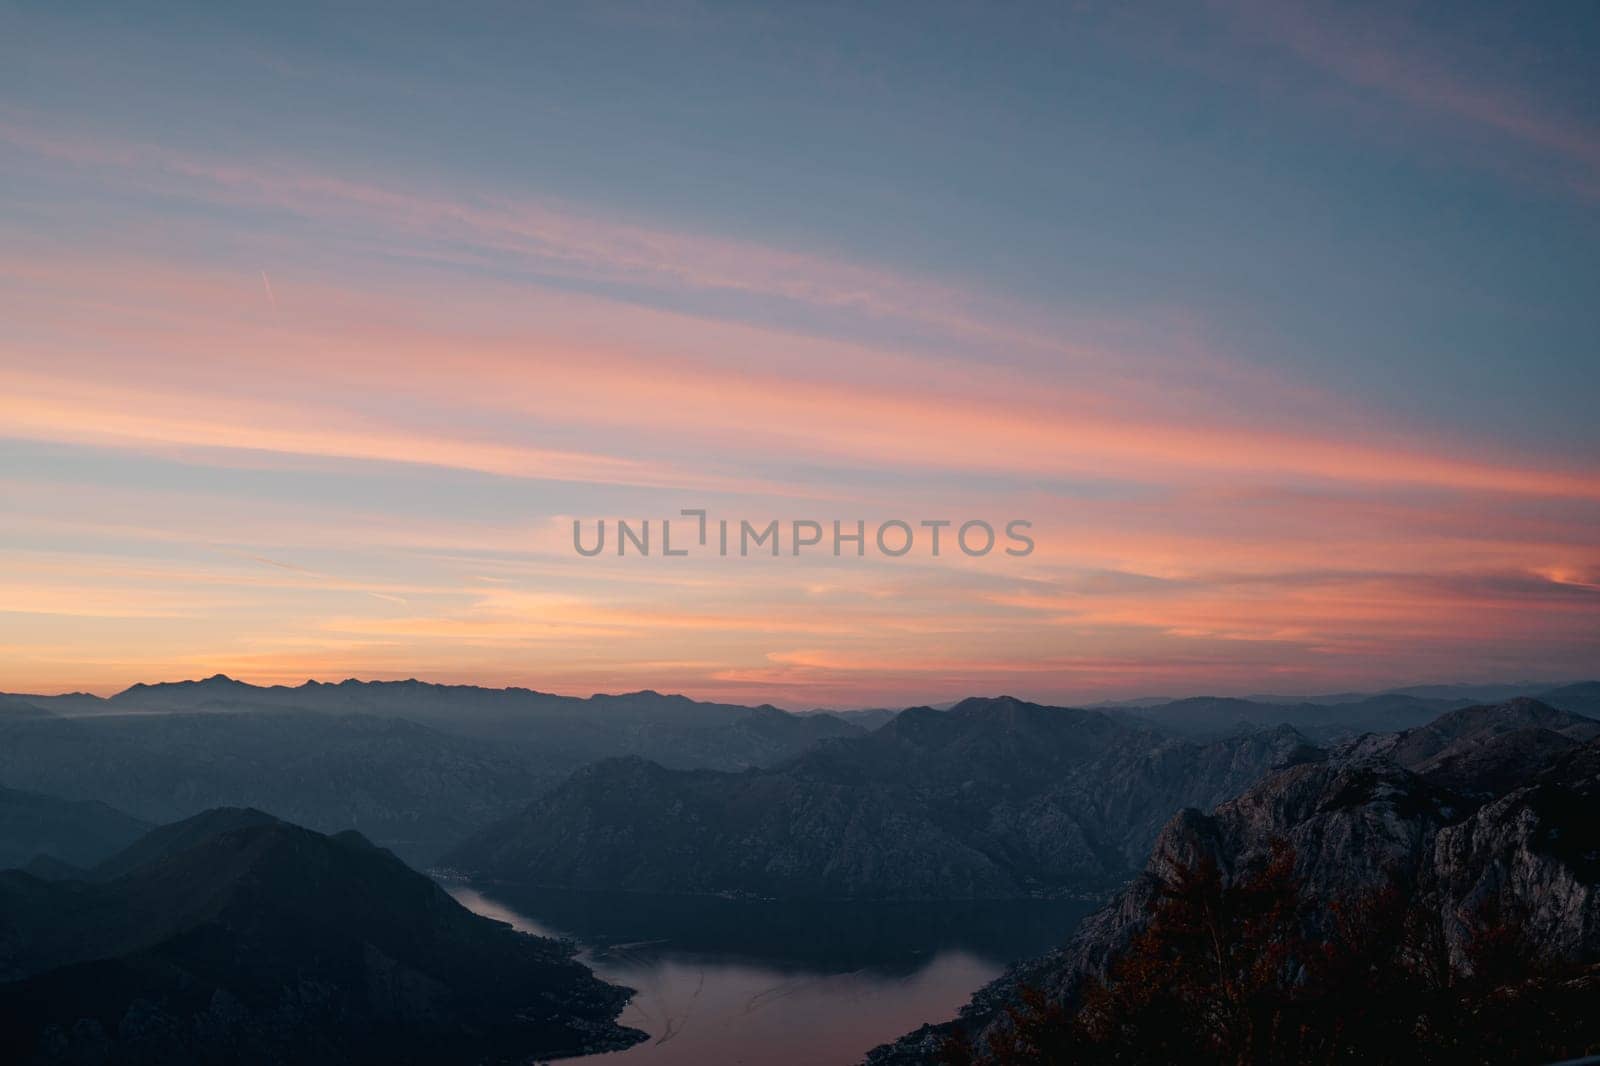 Sunset sky over a mountain range by the bay. High quality photo